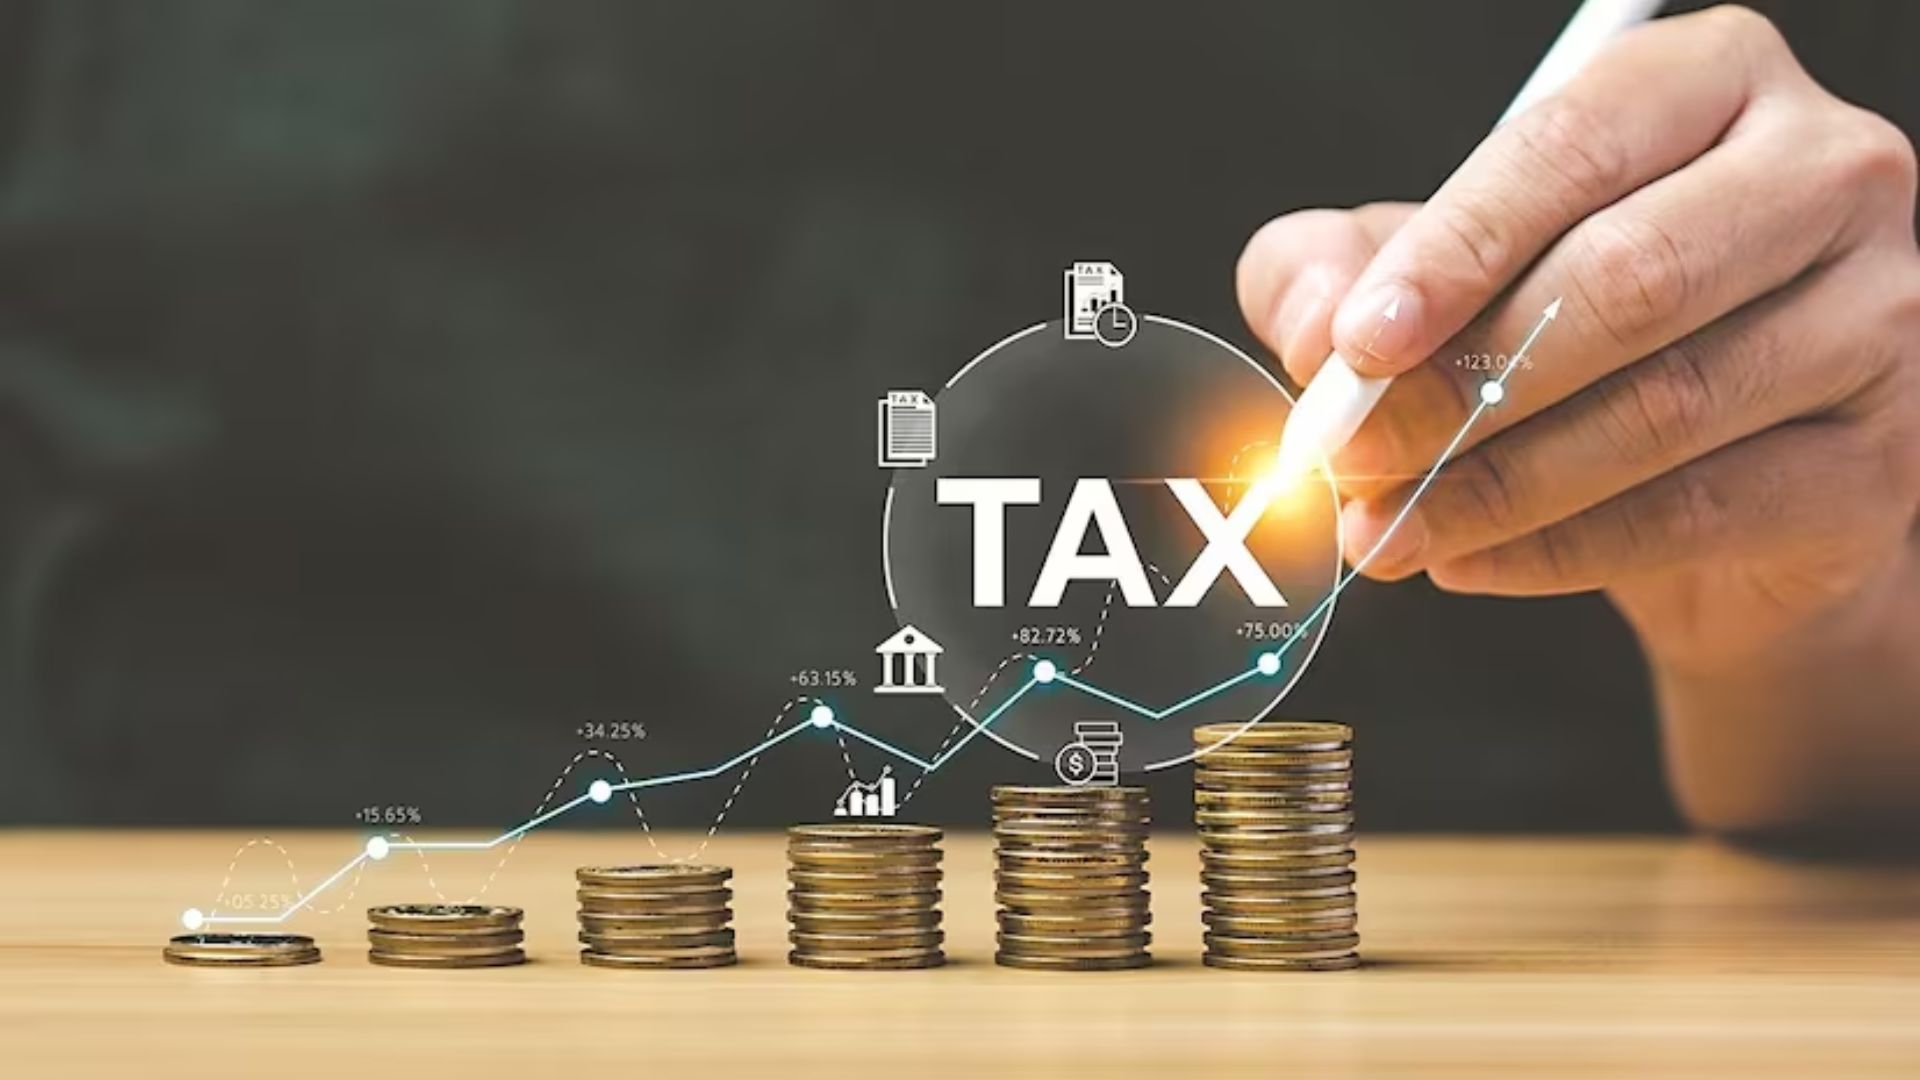 India’s direct tax revenue surges by 20% to reach ₹18.9 trillion